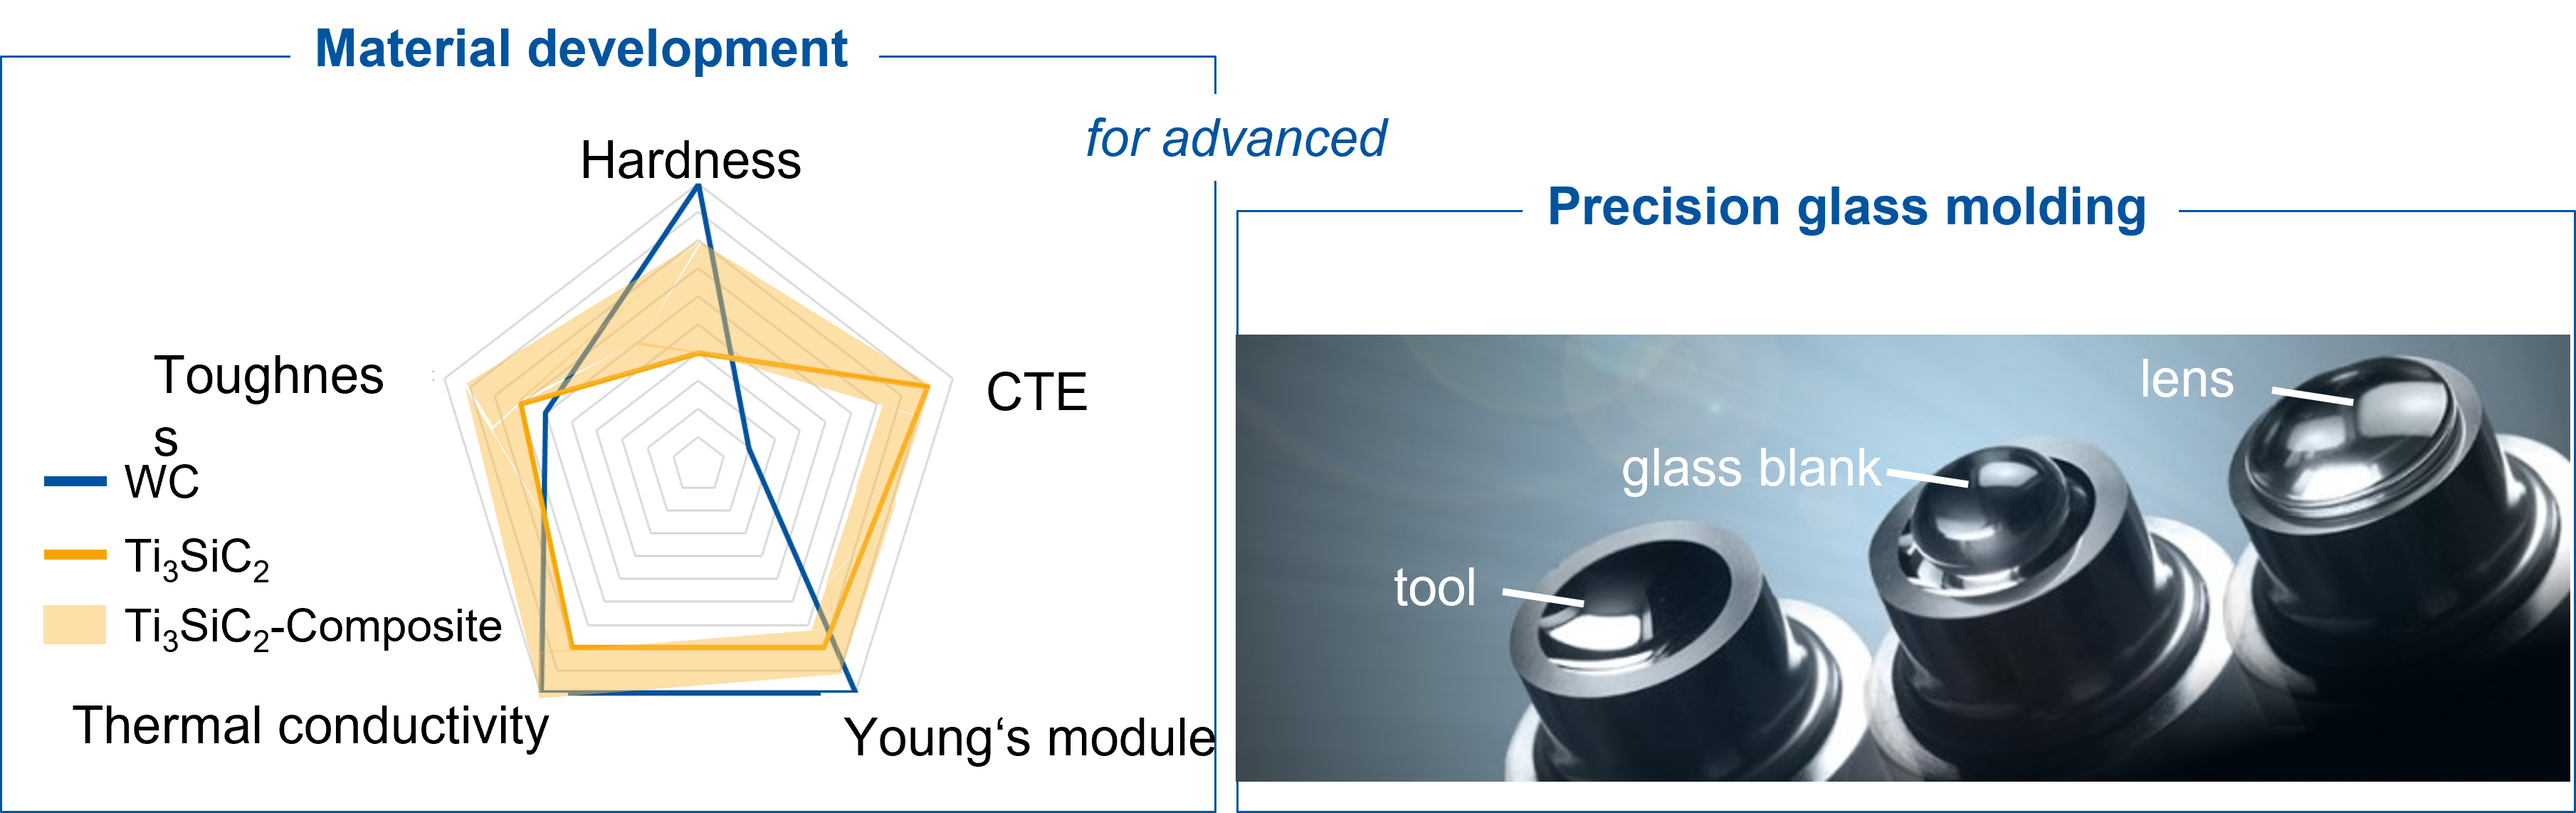 Material development for precision glass moulding